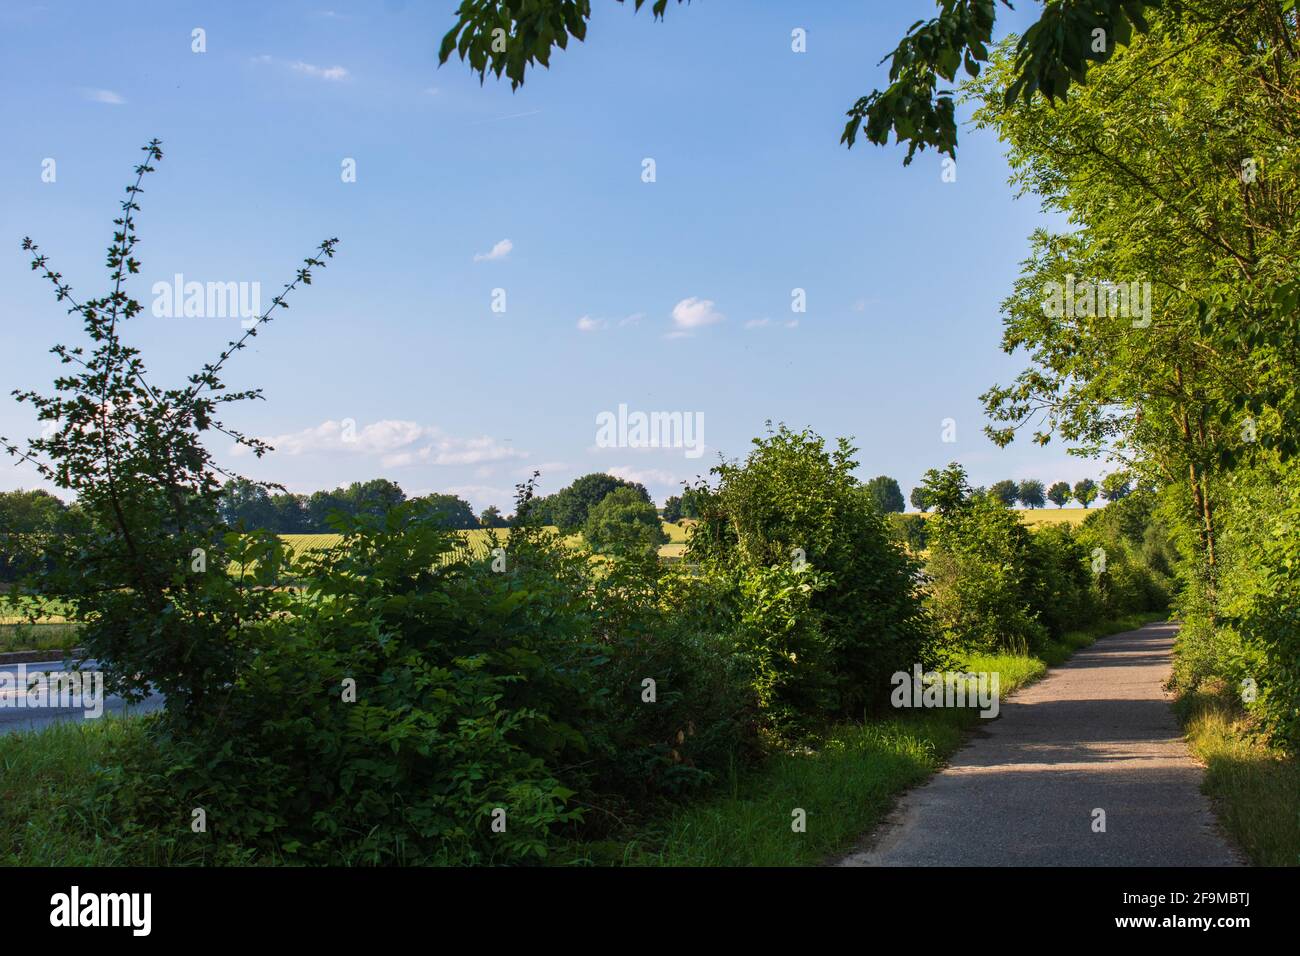 Empty way between trees and bushes on a sunny day next to a street. Countryside in Bad Friedrichshall, Germany. Stock Photo